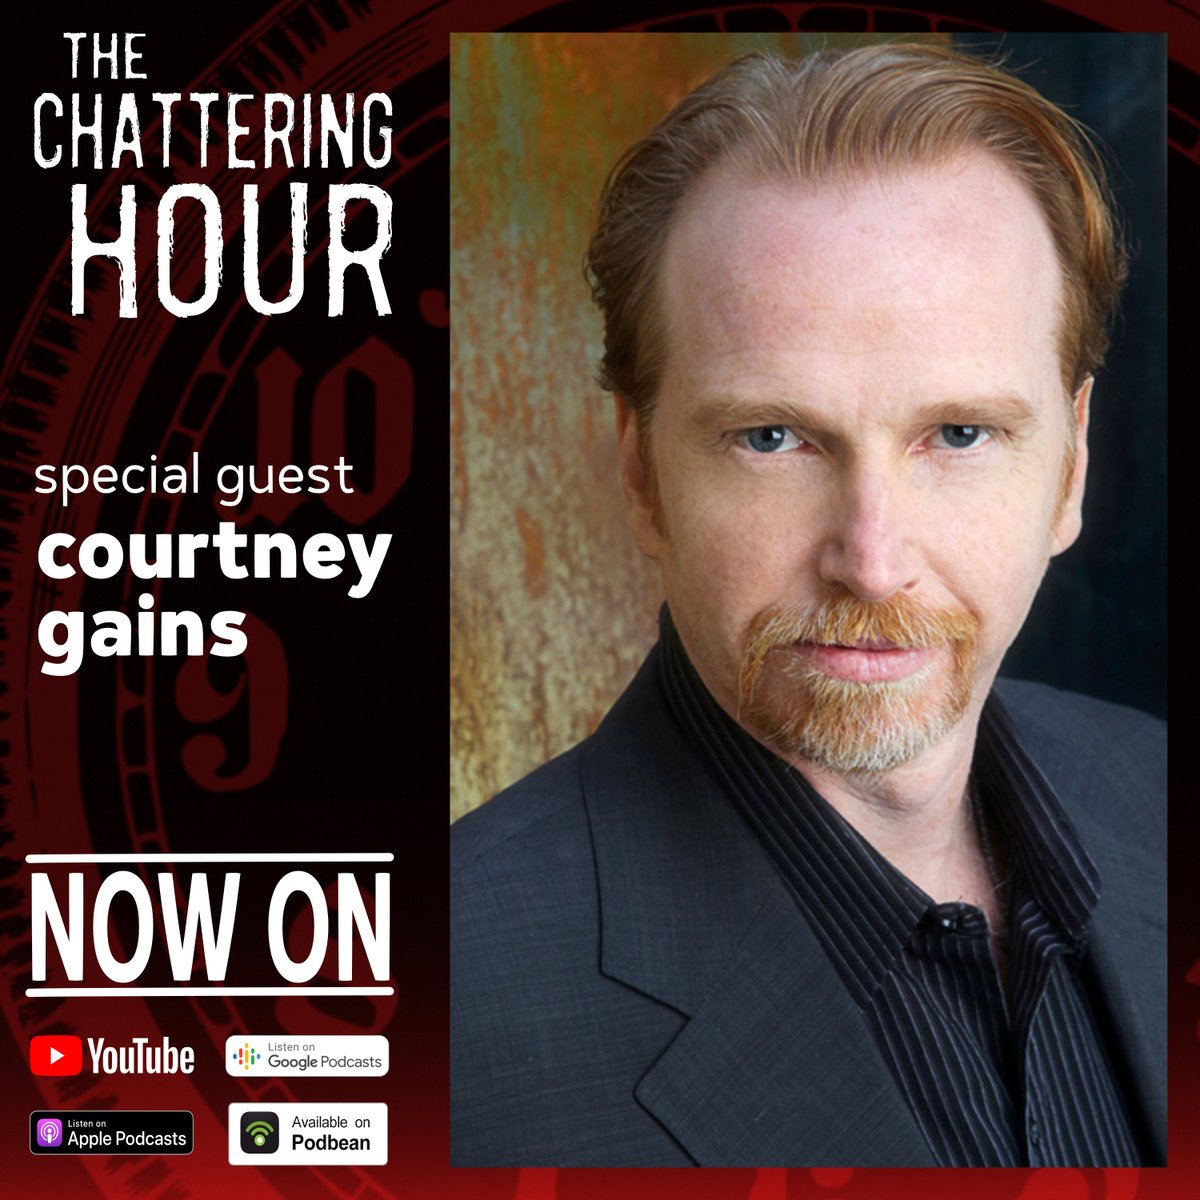 Everyone make sure to watch the #CourtneyGains episode of #TheChatteringHour out NOW on the #ChrisRoeManagement YouTube Channel! bit.ly/3bQd2eb 🎃 #Hellraiser #Nightbreed #ChildrenOfTheCorn #Halloween #StephenKing #HalloweenSeries  #NicholasVince #TeaTimeProductions